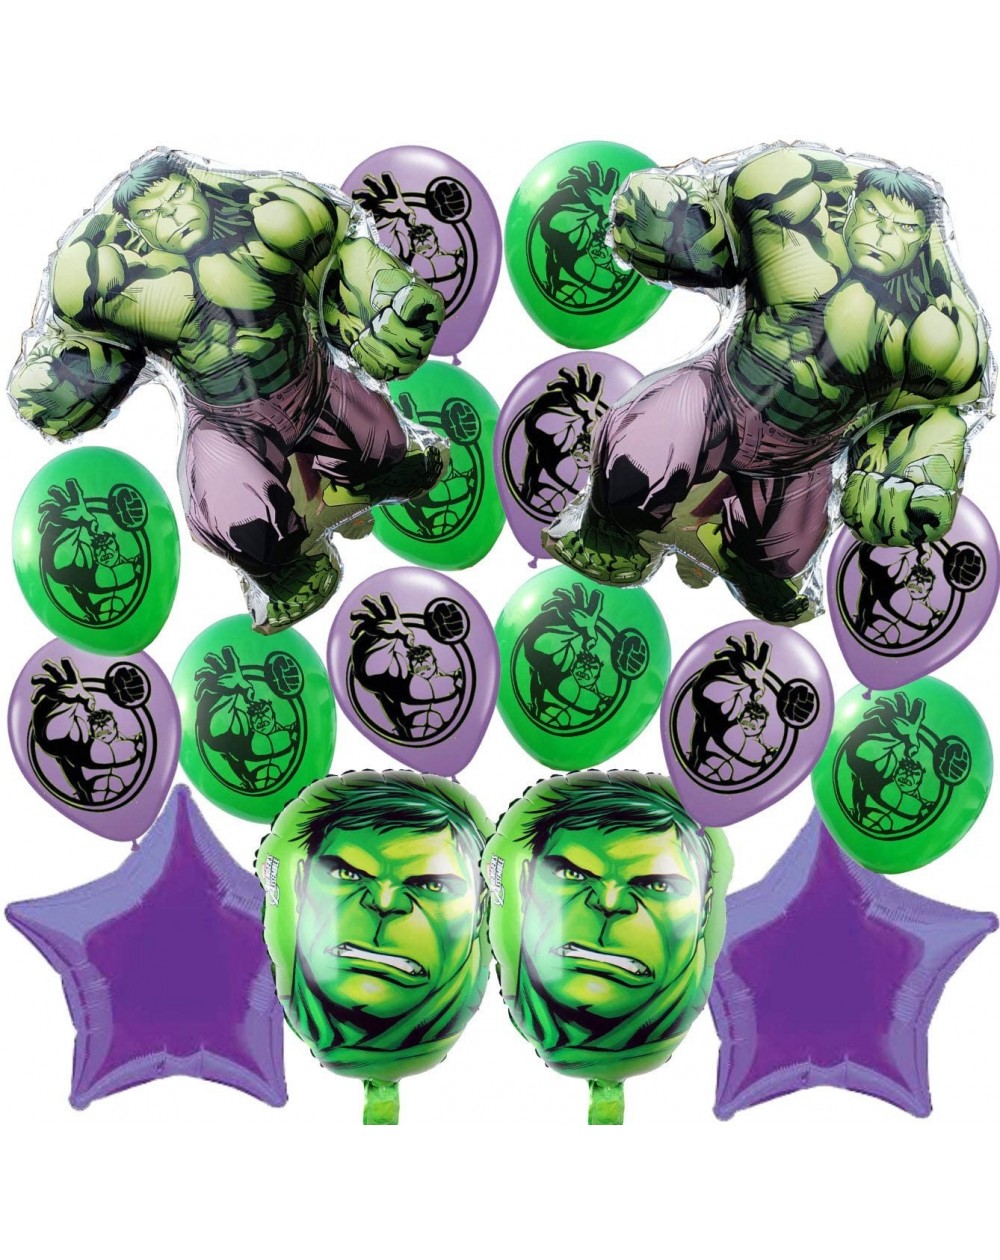 Balloons 18PC HULK FOIL AND LATEX BALLOONS PARTY SUPPLIES DECORATION THEME BIRTHDAY AVENGERS - C819HHGS36M $40.19